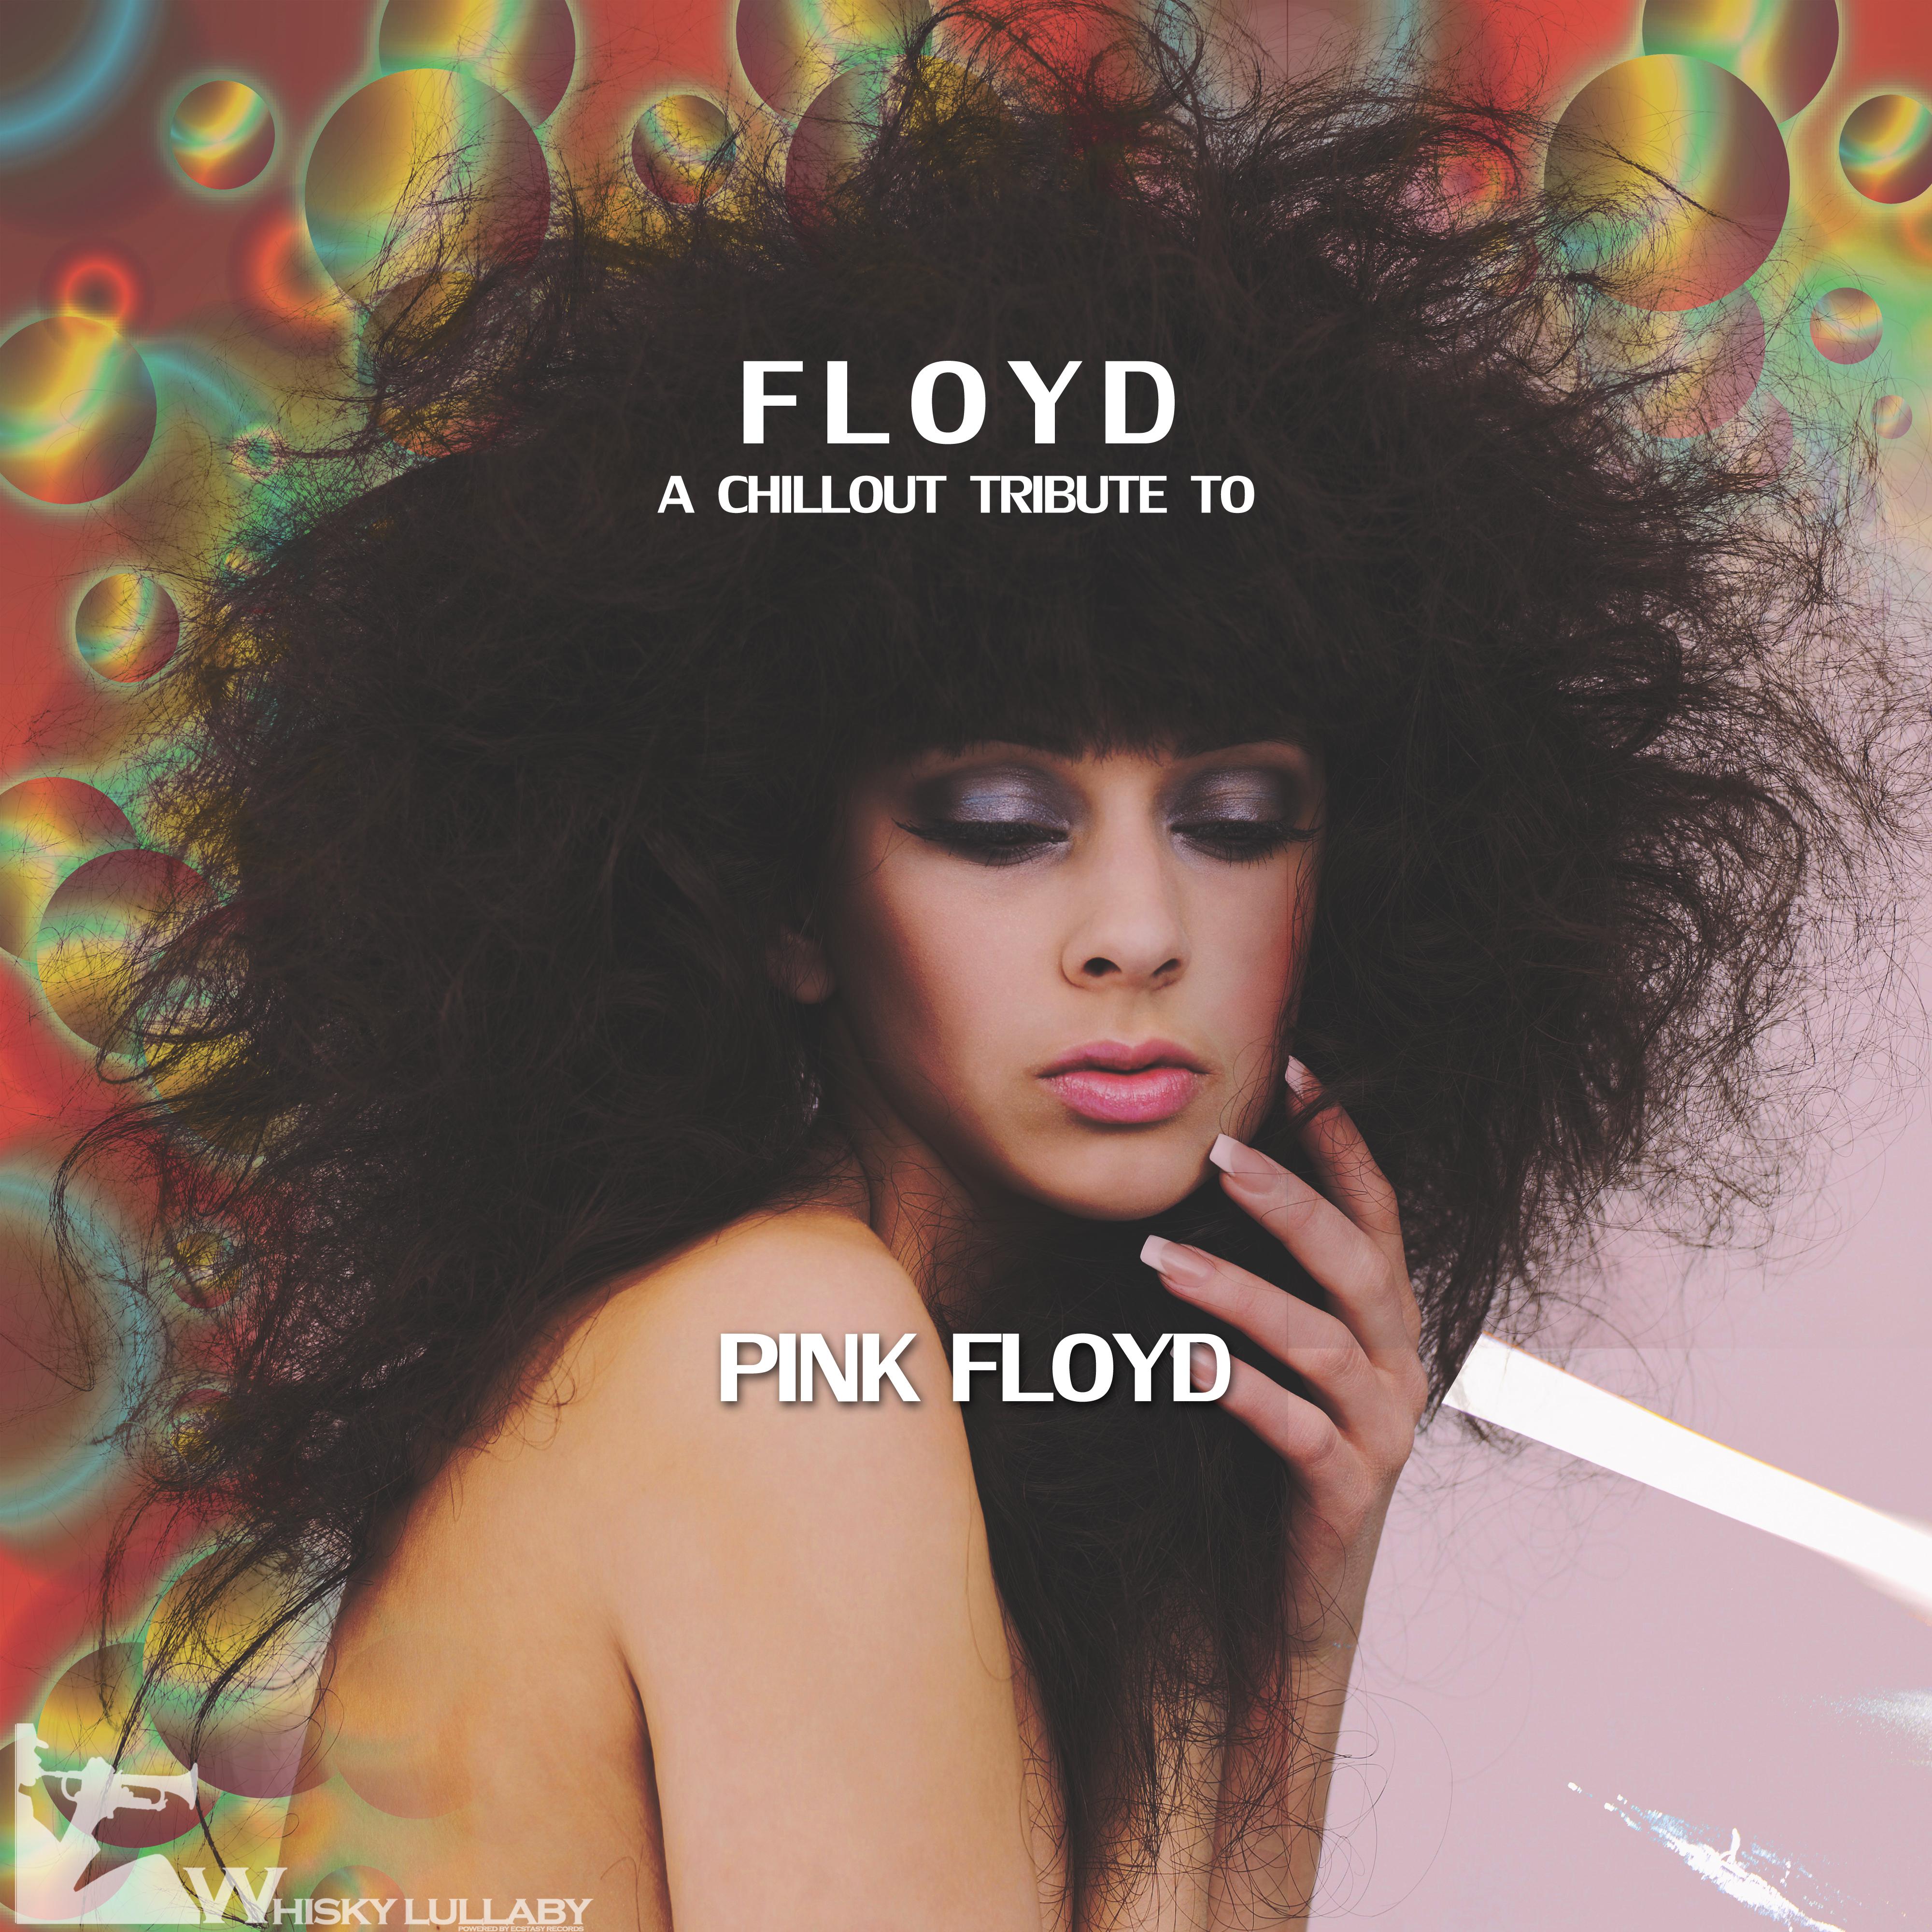 Floyd: A Chillout Tribute to Pink Floyd